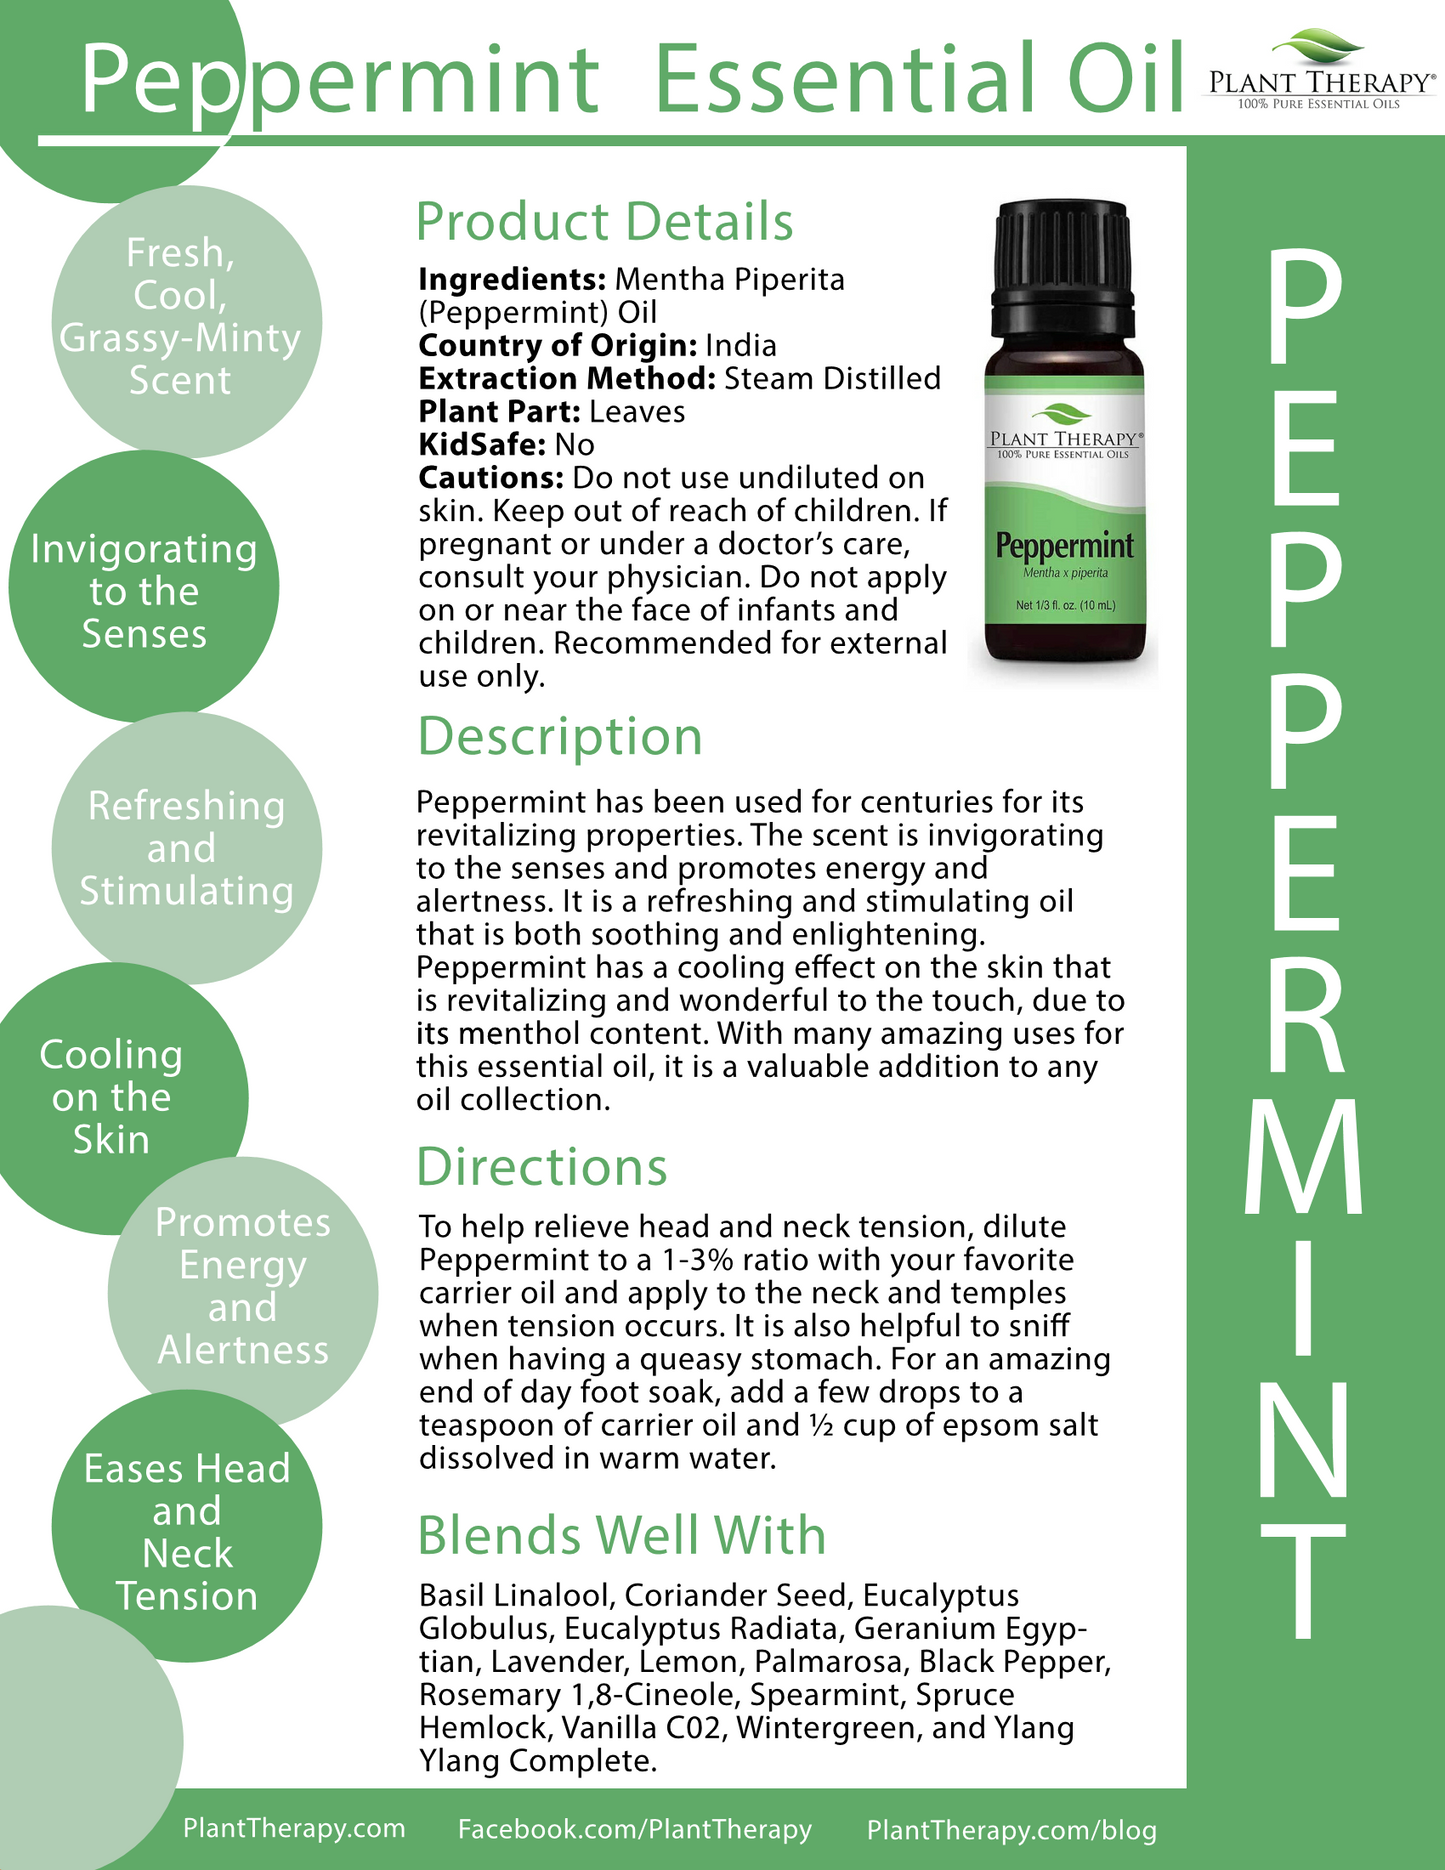 Peppermint Essential Oil by Plant Therapy